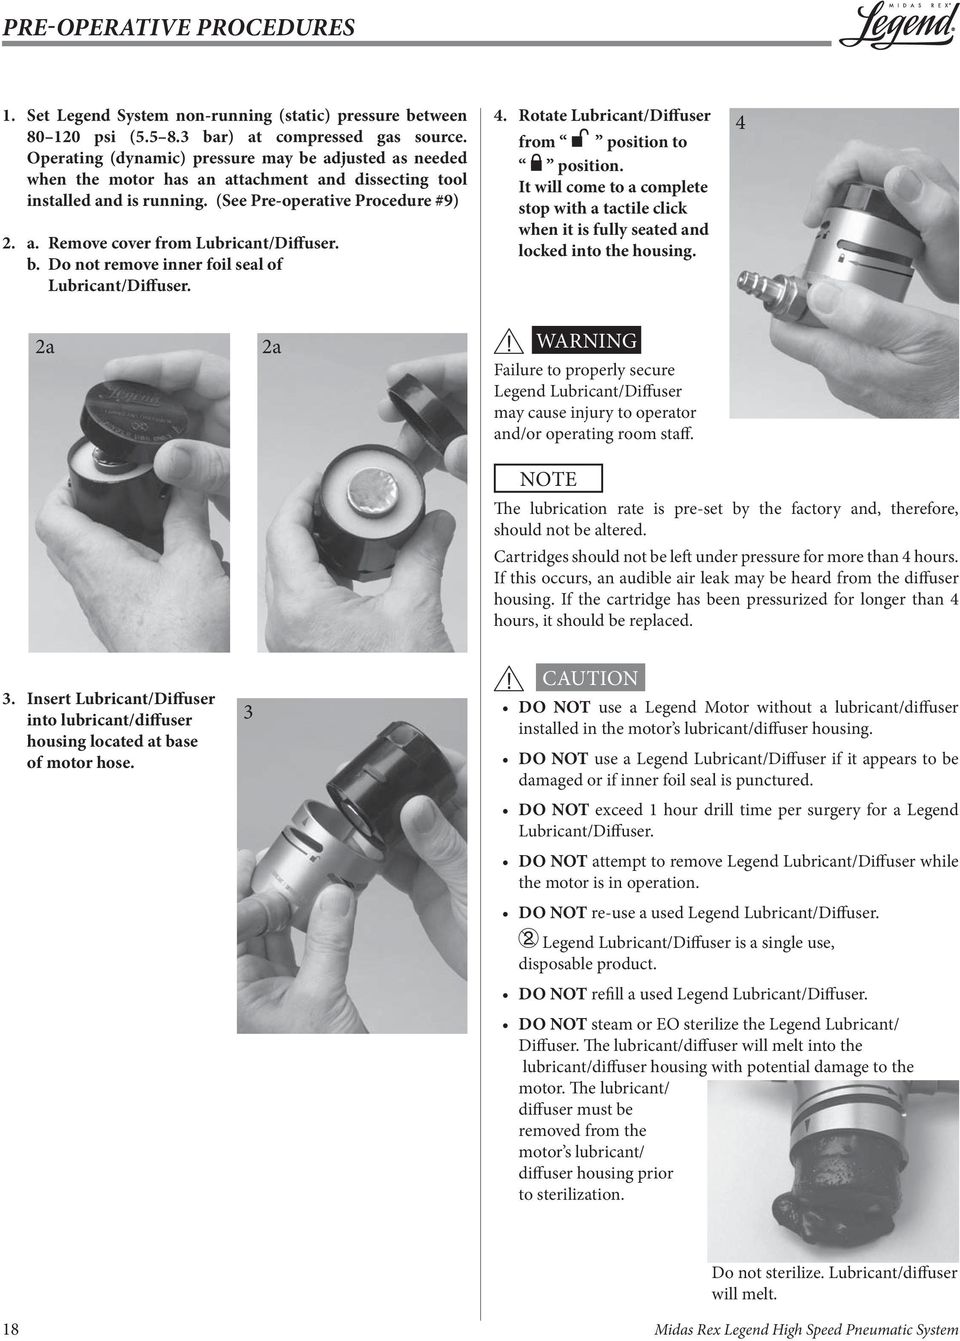 b. Do not remove inner foil seal of Lubricant/Diffuser. 4. Rotate Lubricant/Diffuser from position to position.